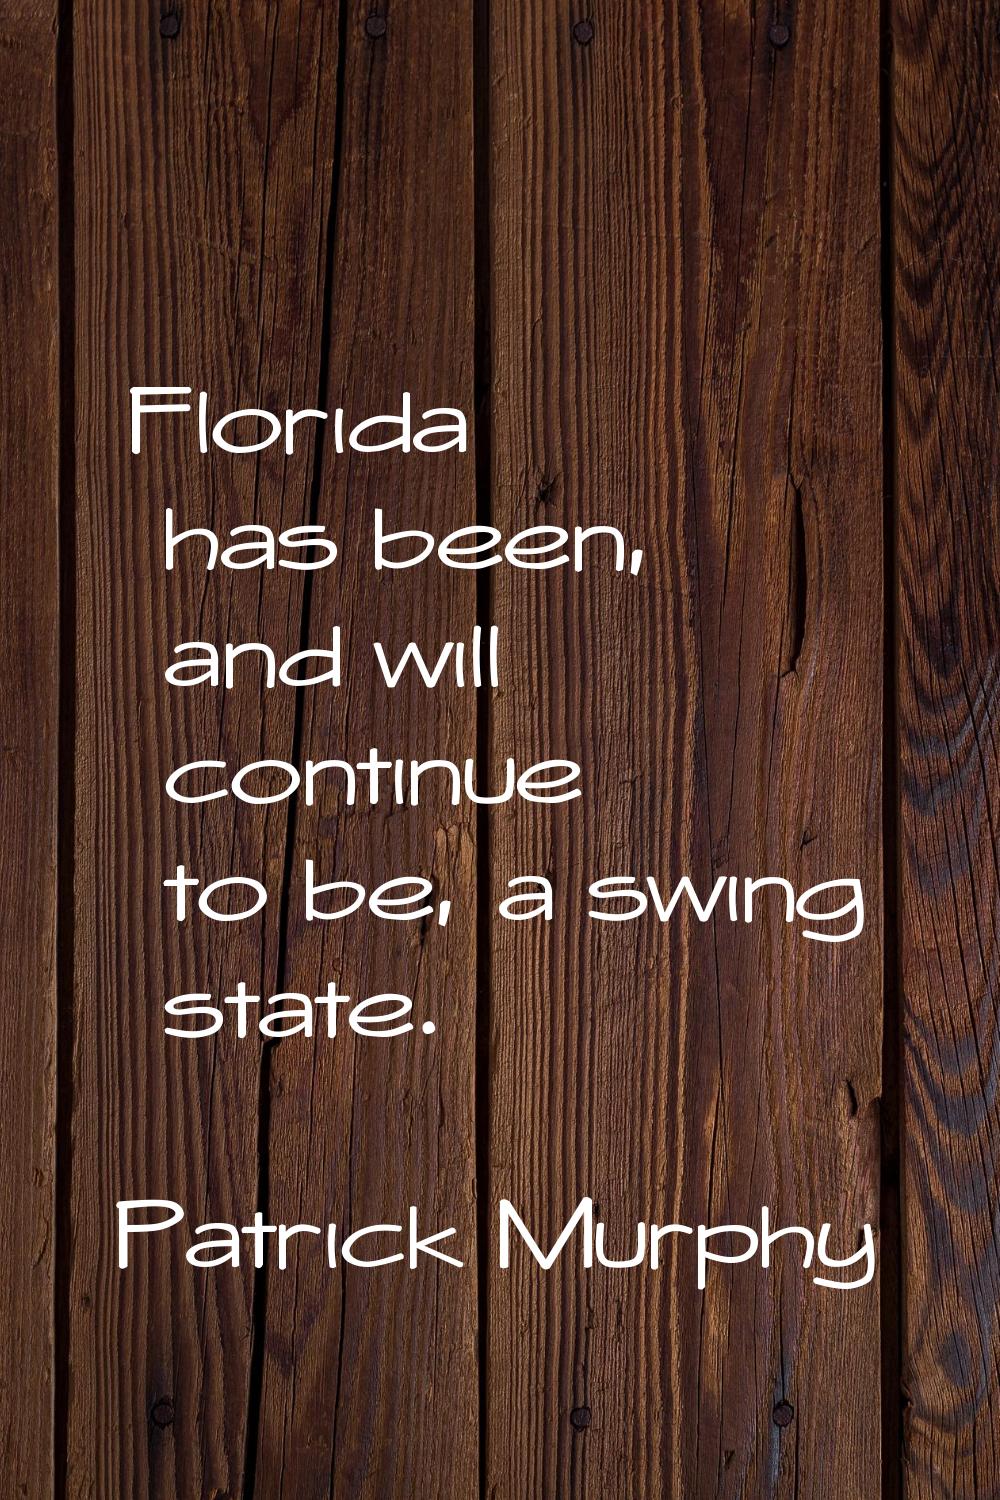 Florida has been, and will continue to be, a swing state.